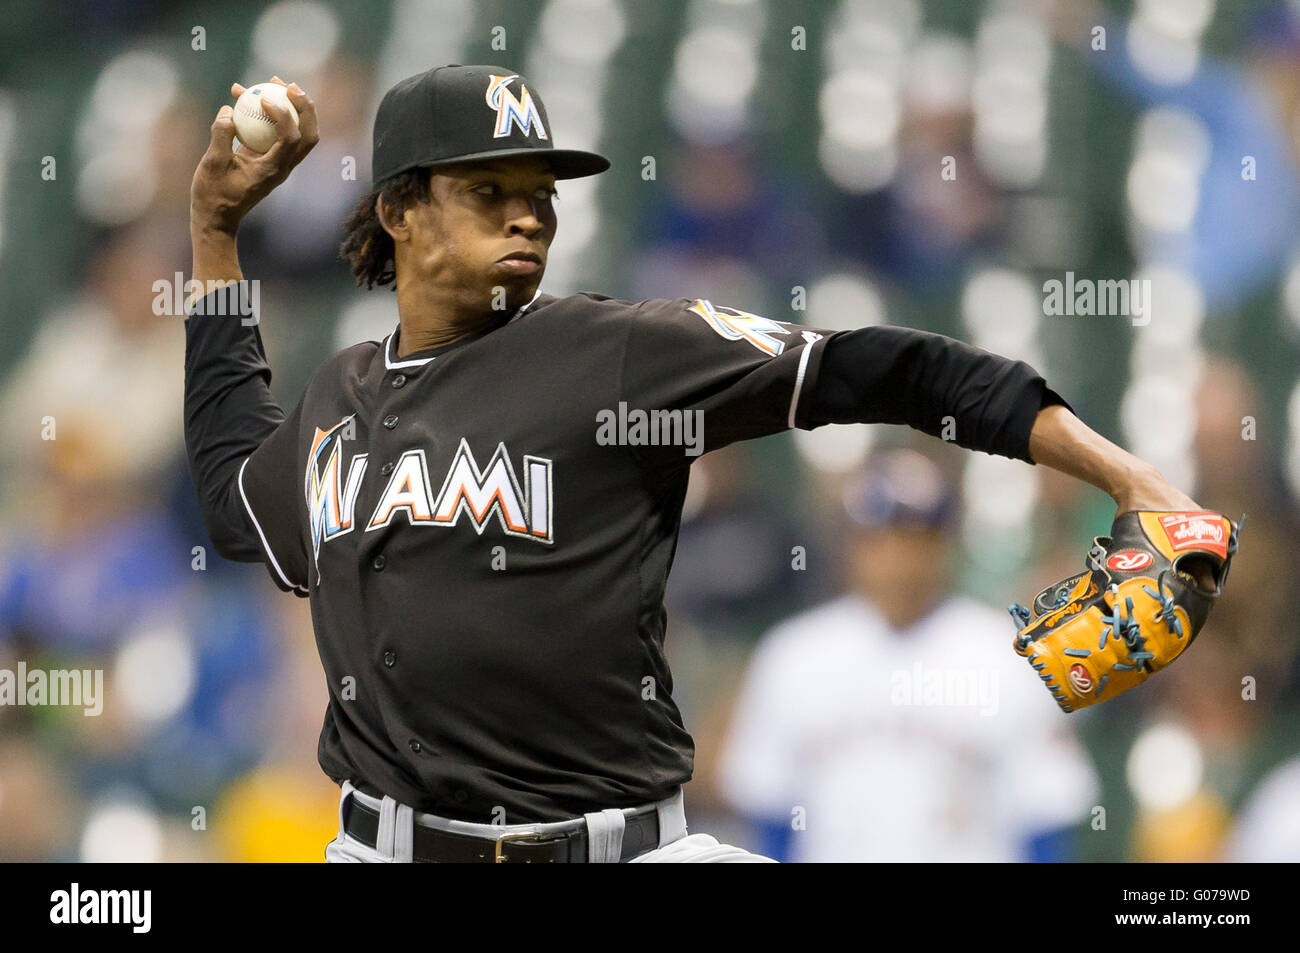 Milwaukee, WI, USA. 29th Apr, 2016. Miami Marlins relief pitcher Jose Urena #62 delivers a pitch in the Major League Baseball game between the Milwaukee Brewers and the Miami Marlins at Miller Park in Milwaukee, WI. John Fisher/CSM/Alamy Live News Stock Photo